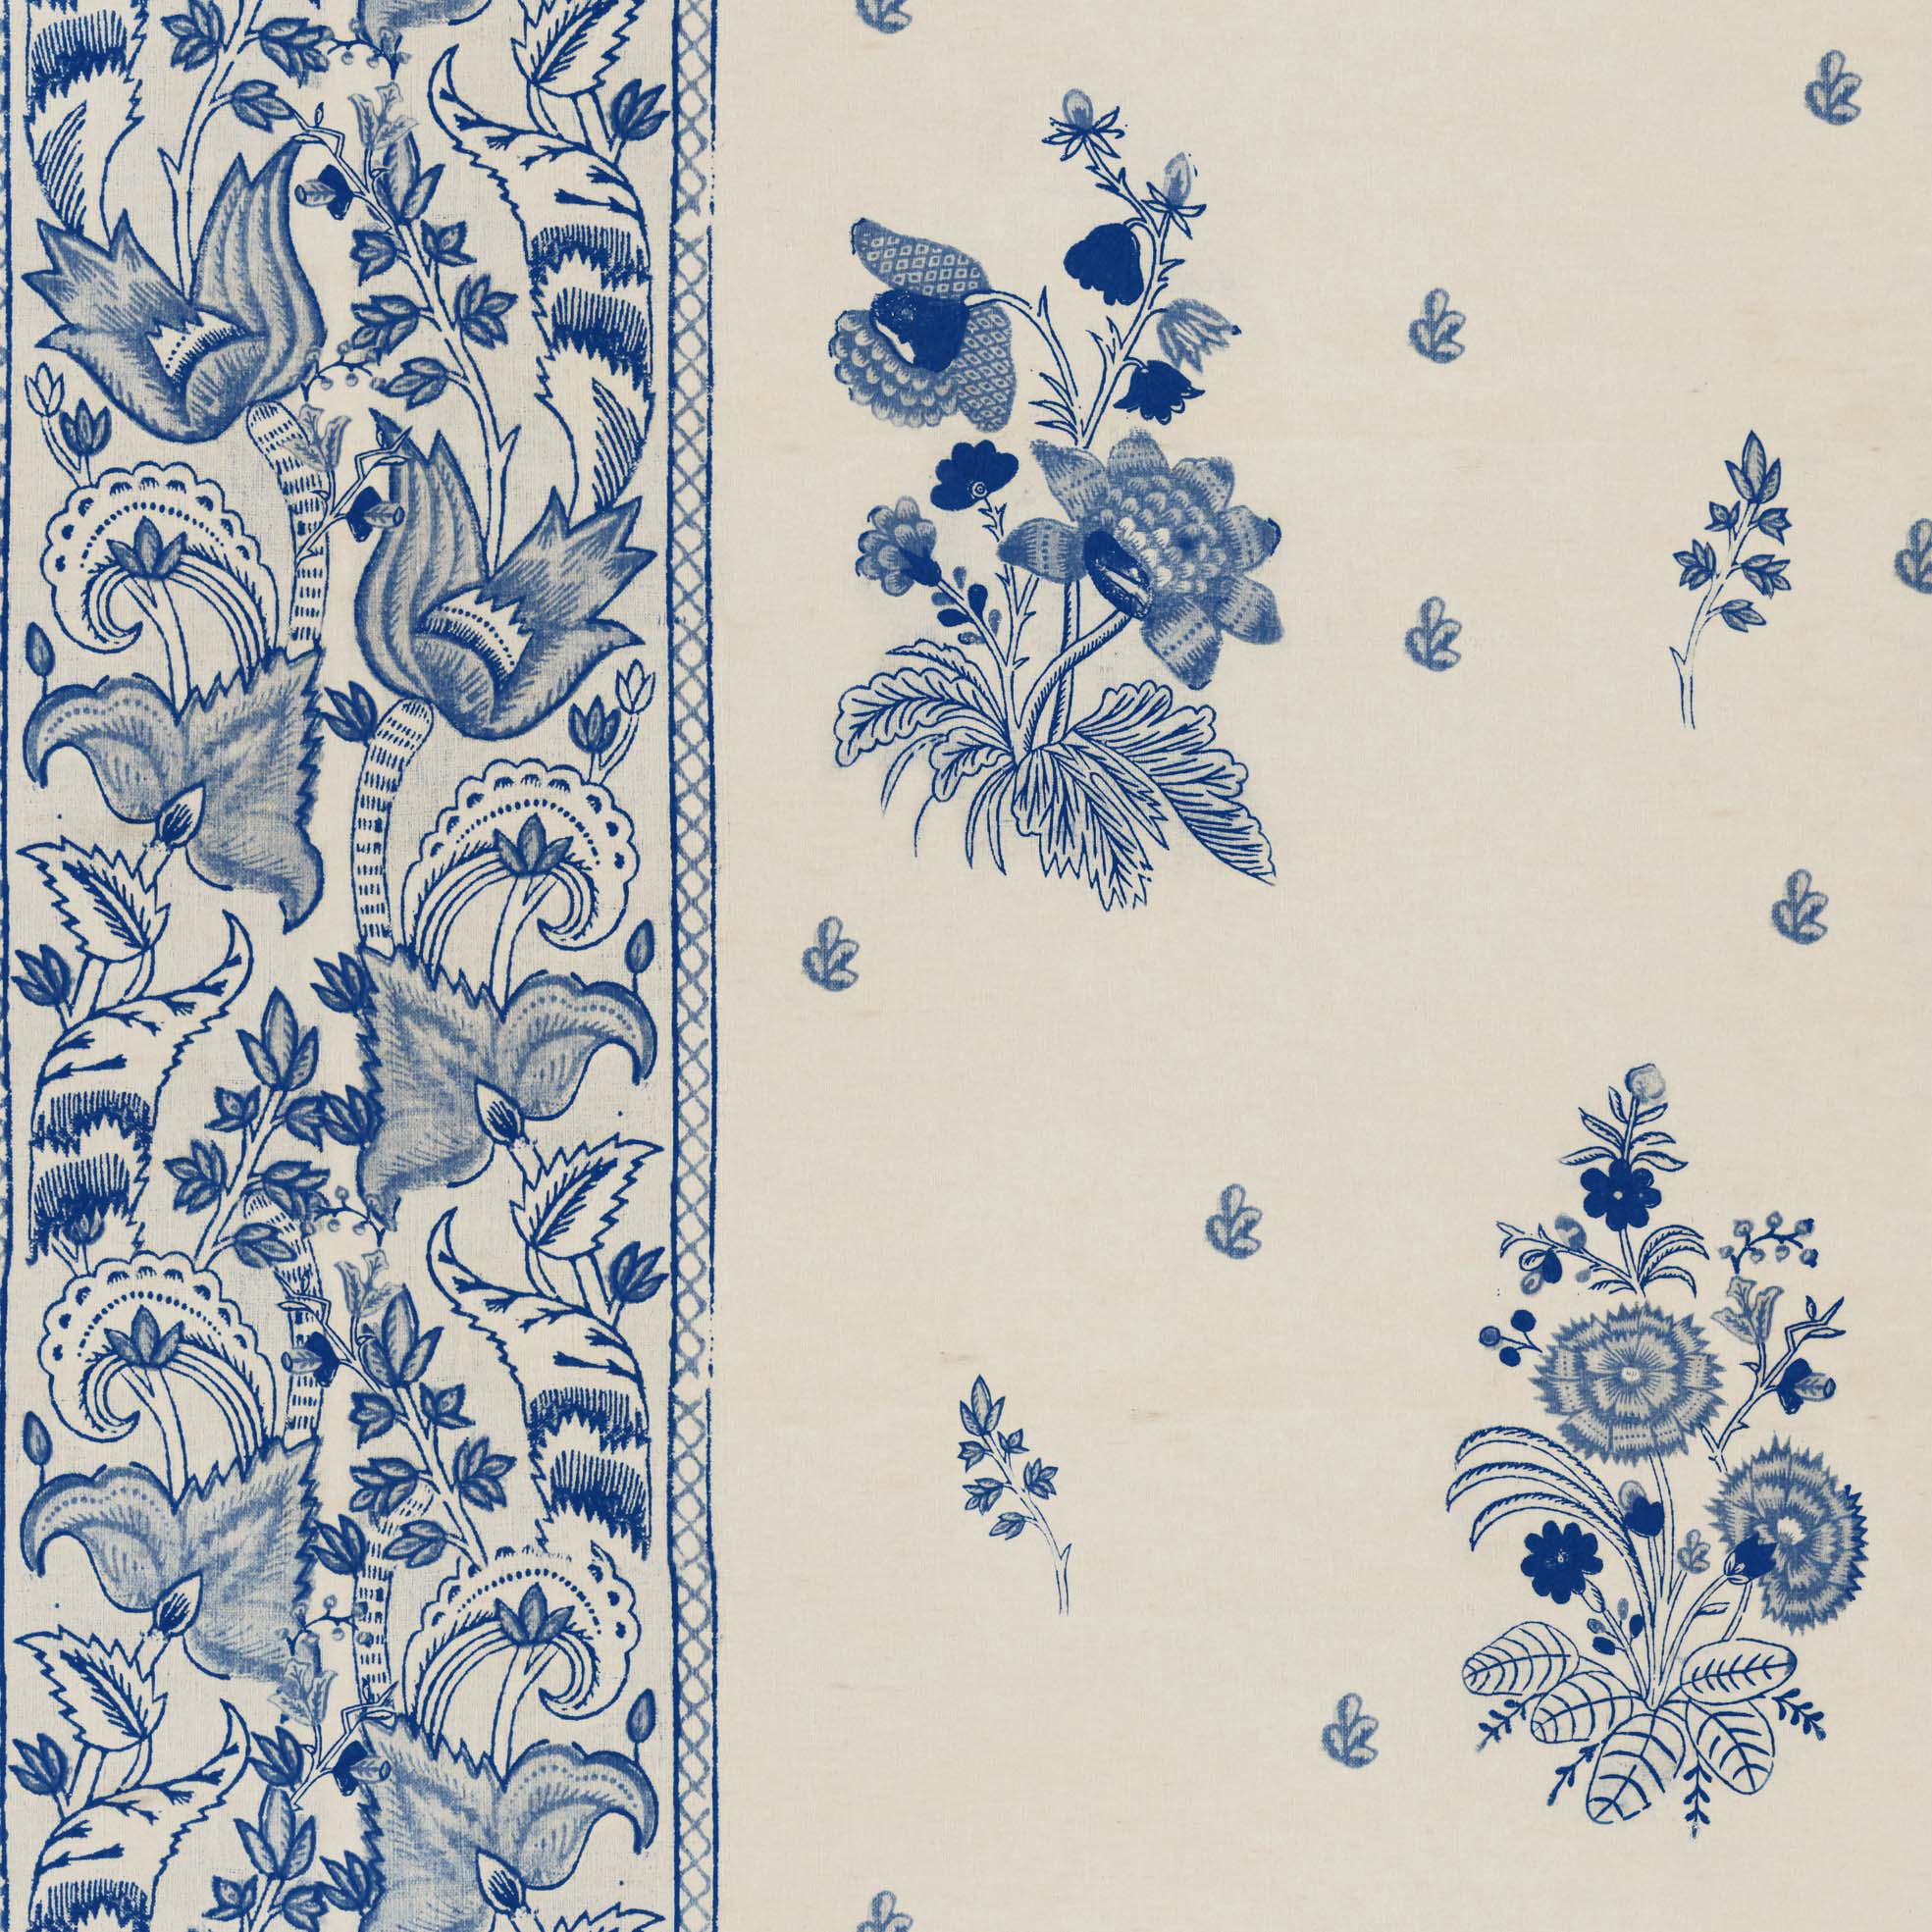 images/productimages/small/korond-floral-indigo-52x50cm-wp30024-wallpaper.jpg